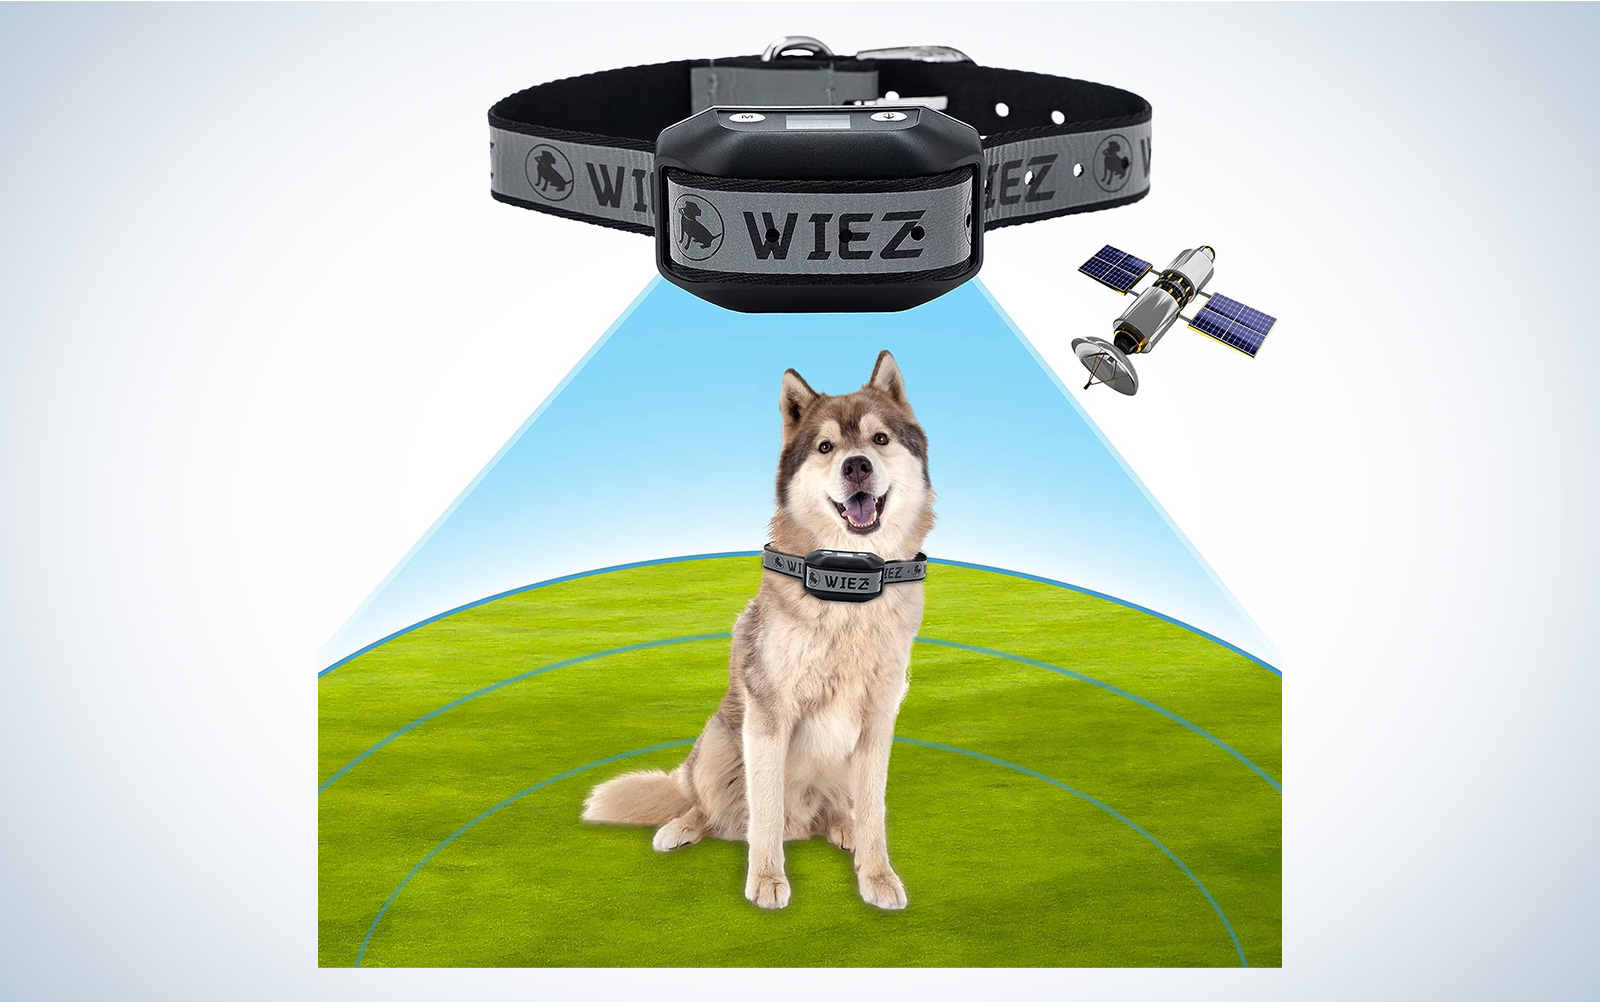 Do wireless dog containment systems work?